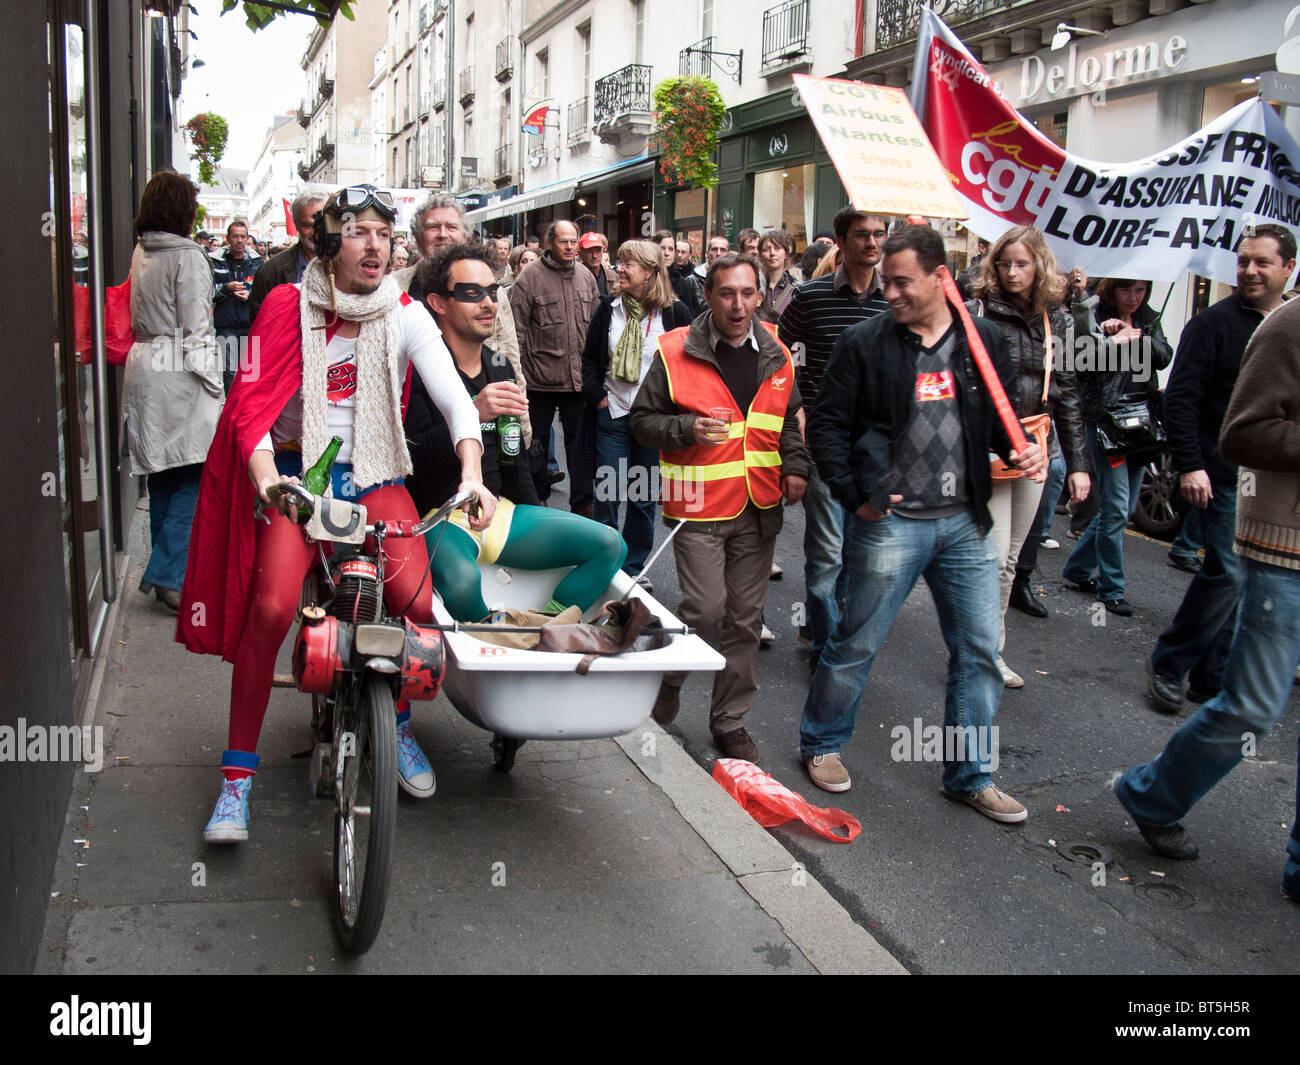 People take part in a demonstration over pension reform in Nantes, France, October 19, 2010 Stock Photo